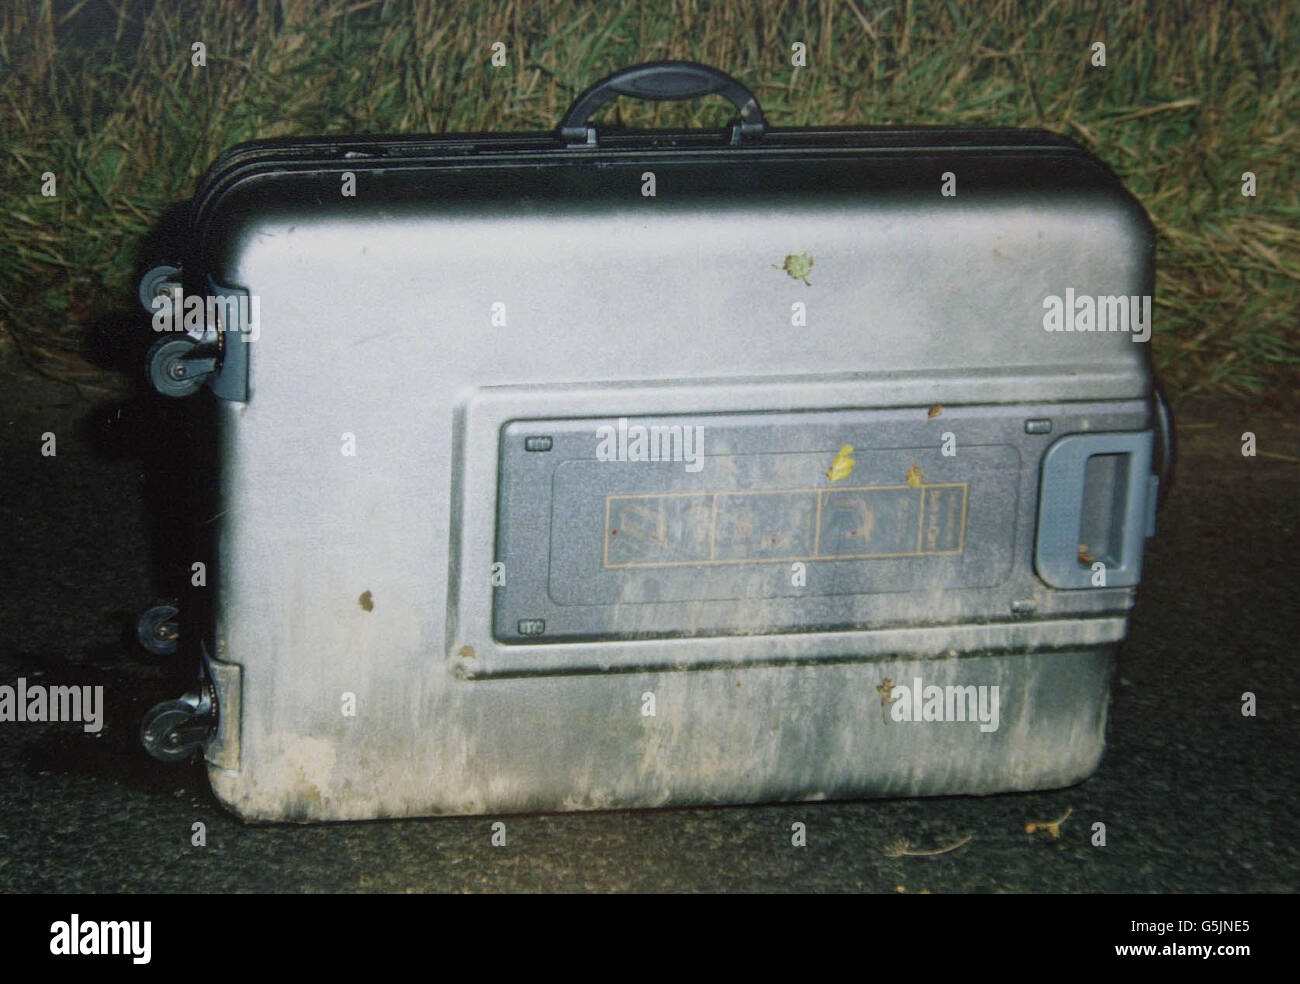 The suitcase which contained the body of a bound and gagged woman who was discovered in a country lane near York. The body of an Asian or Oriental-looking woman who's identity is still unknown to police, was discovered near the busy A64 dual carriageway. * 9/1/02: North Yorkshire police have identified the body as that of Hyo Jung Jin from South Korea. Police said she was a 21-year-old student at Lyon University in France who was due to visit London in October and said concerns were initially raised after Hyo Jung Jin failed to return to her university in October of last year. Stock Photo